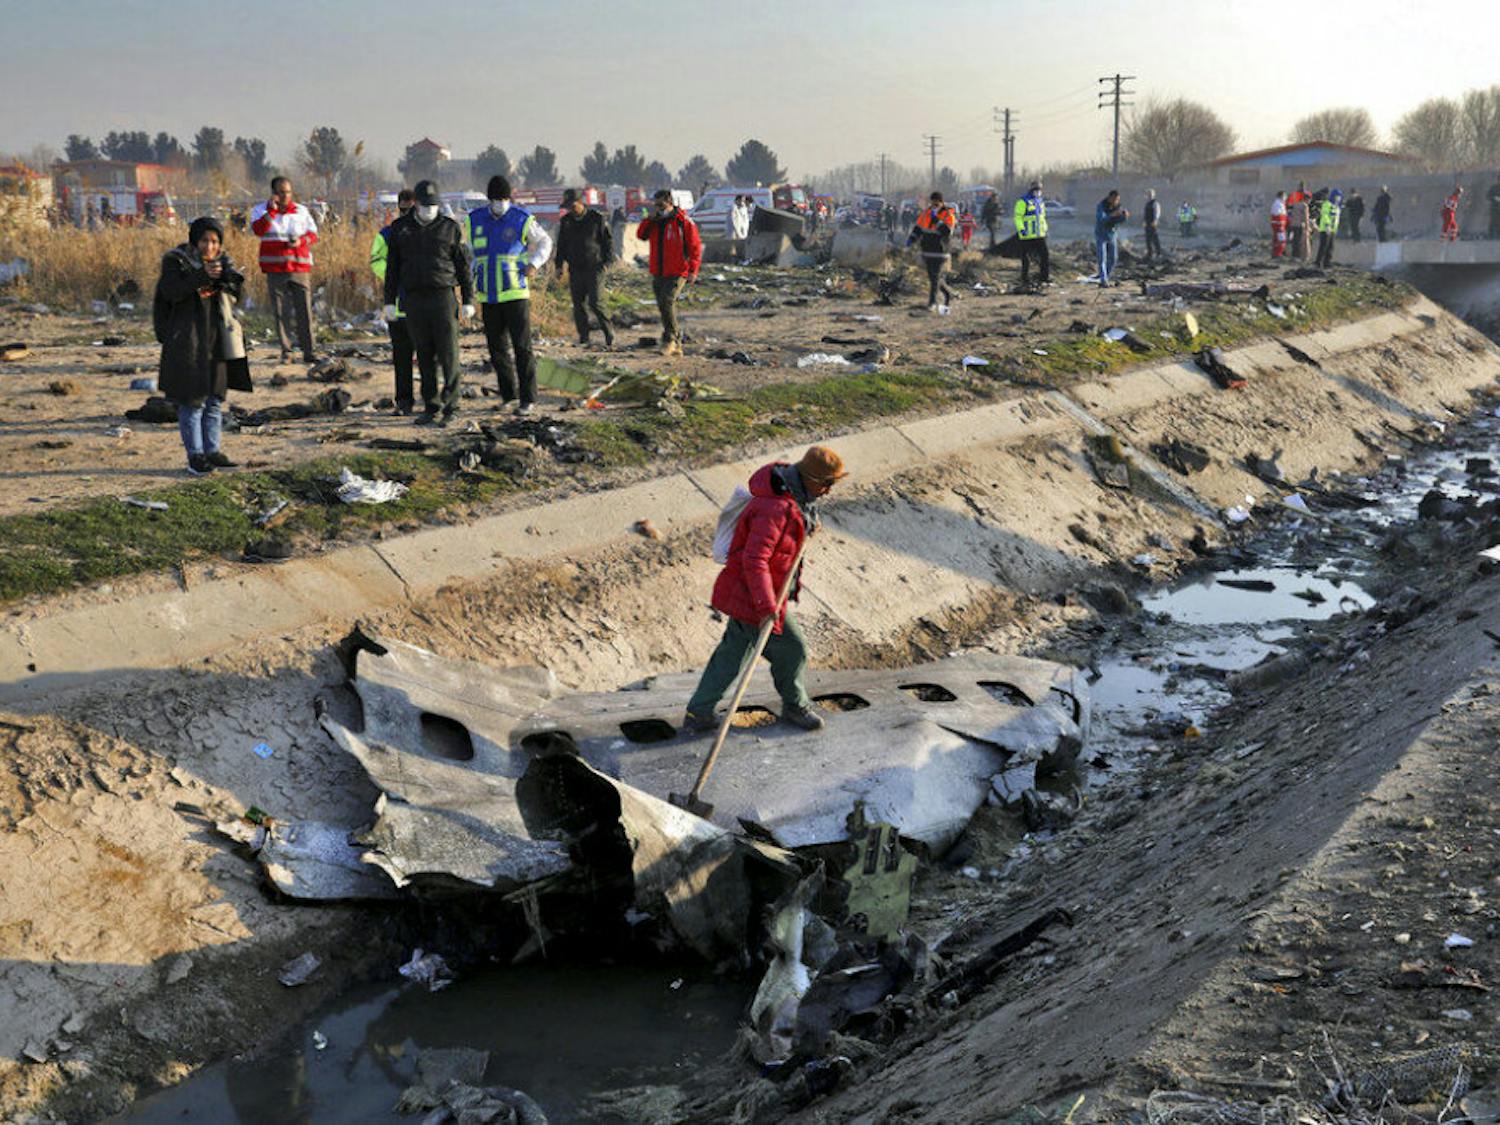 Rescue workers inspect the scene where a Ukrainian plane crashed in Shahedshahr, southwest of the capital Tehran, Iran, Wednesday, Jan. 8, 2020. A Ukrainian airplane with more than 170 people crashed on Wednesday shortly after takeoff from Tehran's main airport, killing all onboard. (AP Photo/Ebrahim Noroozi)